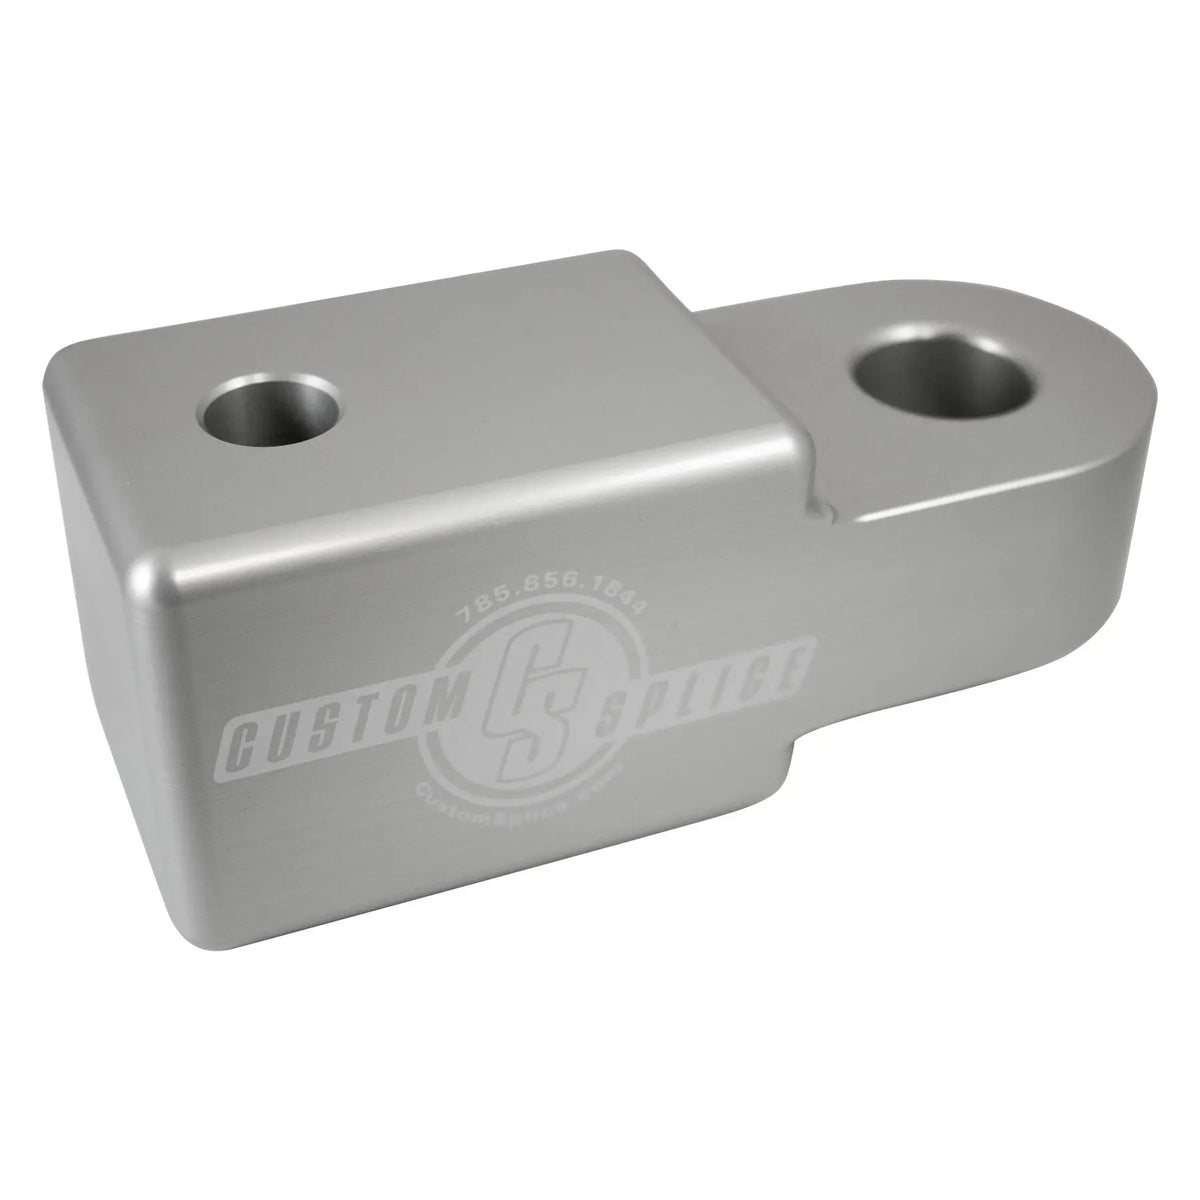 Silver 2 1/2" Hitch Receiver Shackle Adapter - Angled view for profile and scale. 